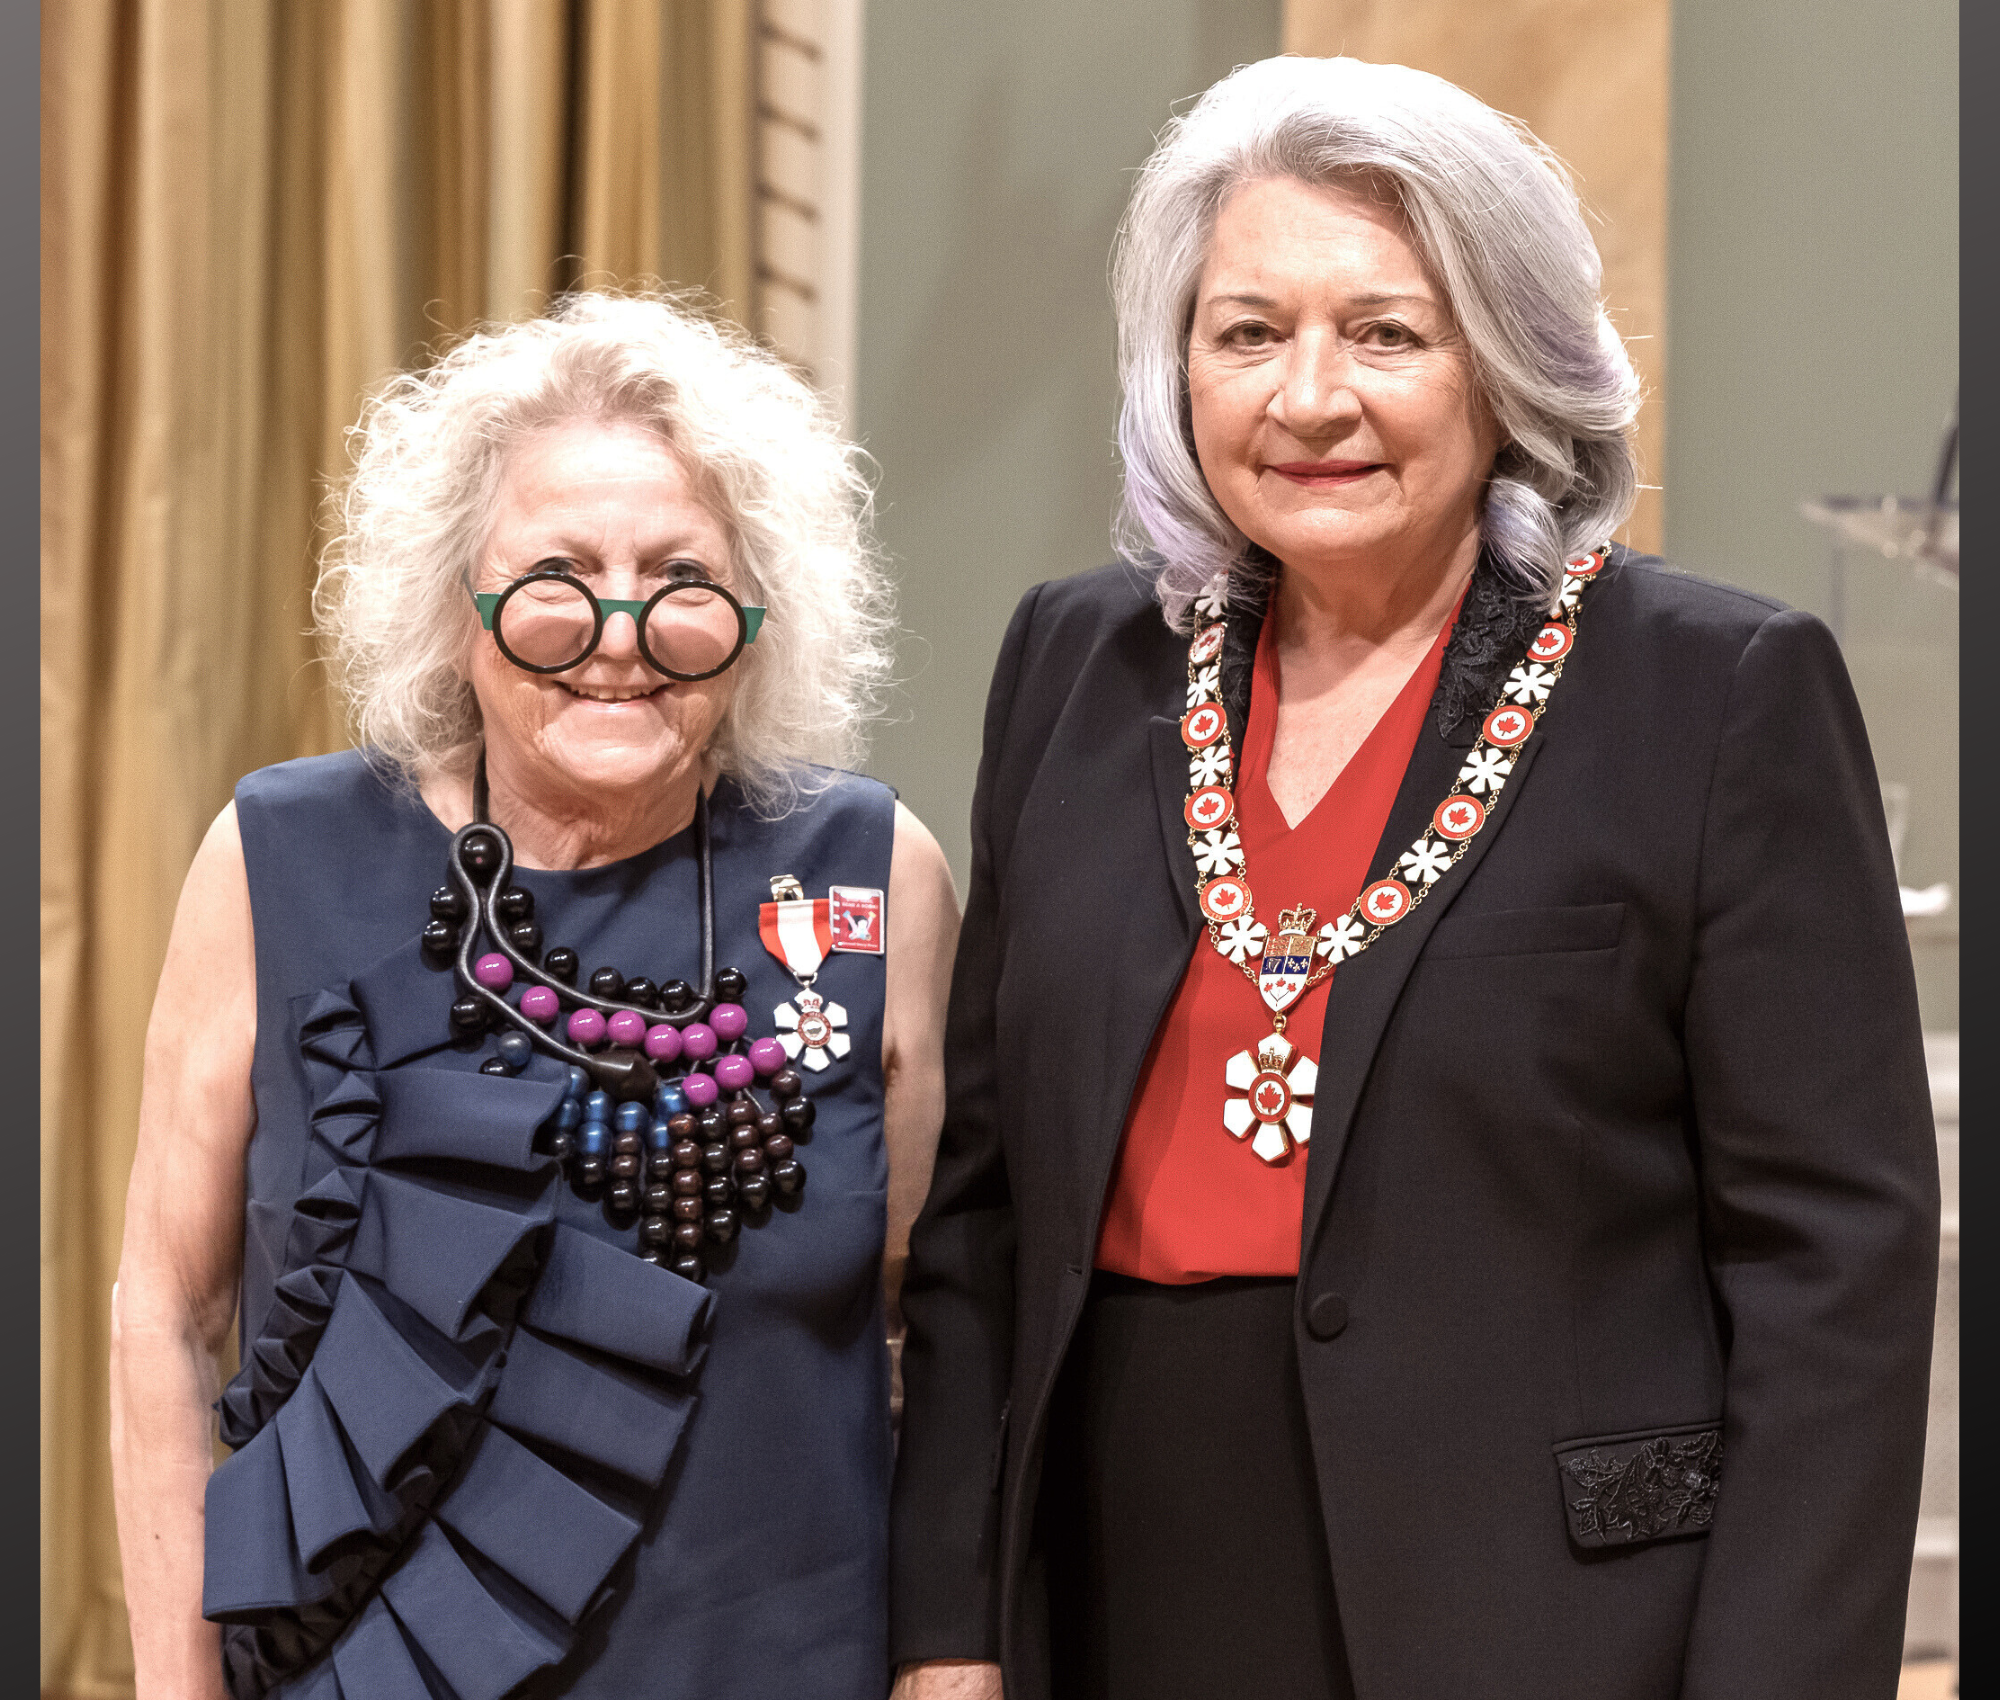 Photograph of Margie Wolfe standing next to Governor General Mary Simon during the medal ceremony in Rideau Hall in Ottawa.